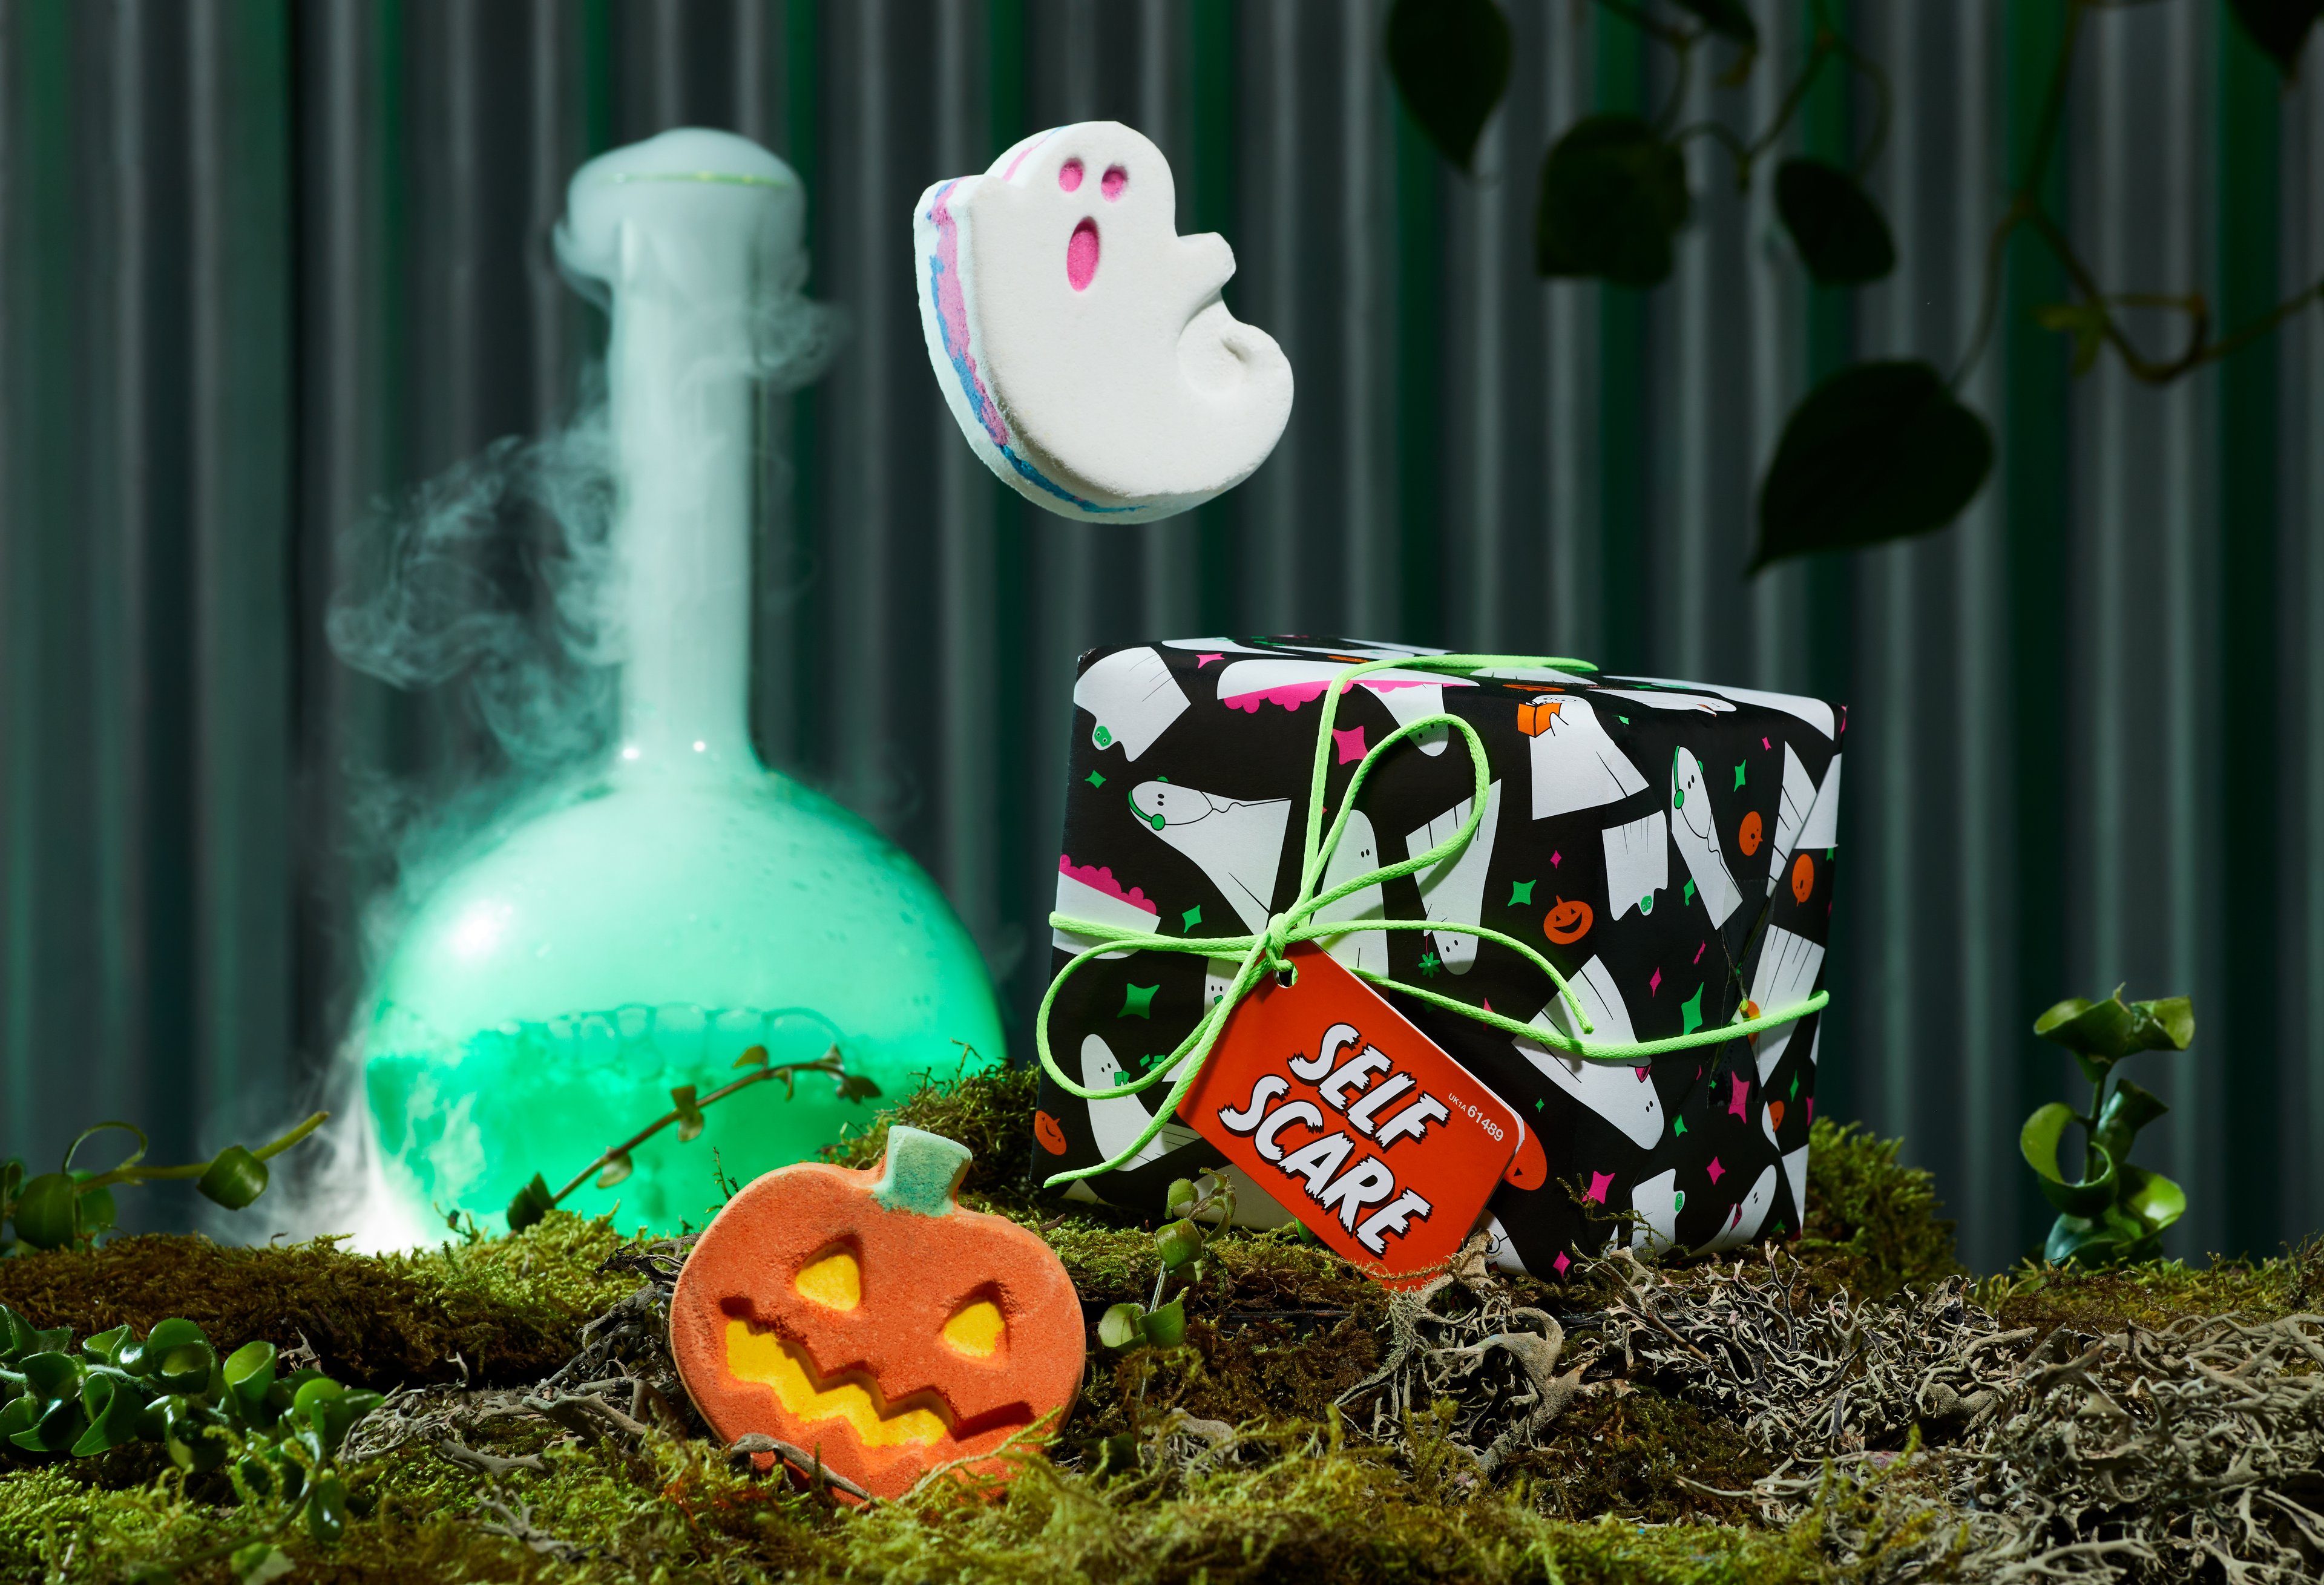 Self Scare gift, in front of a dark green background, surrounded by its products on a bed of moss. 